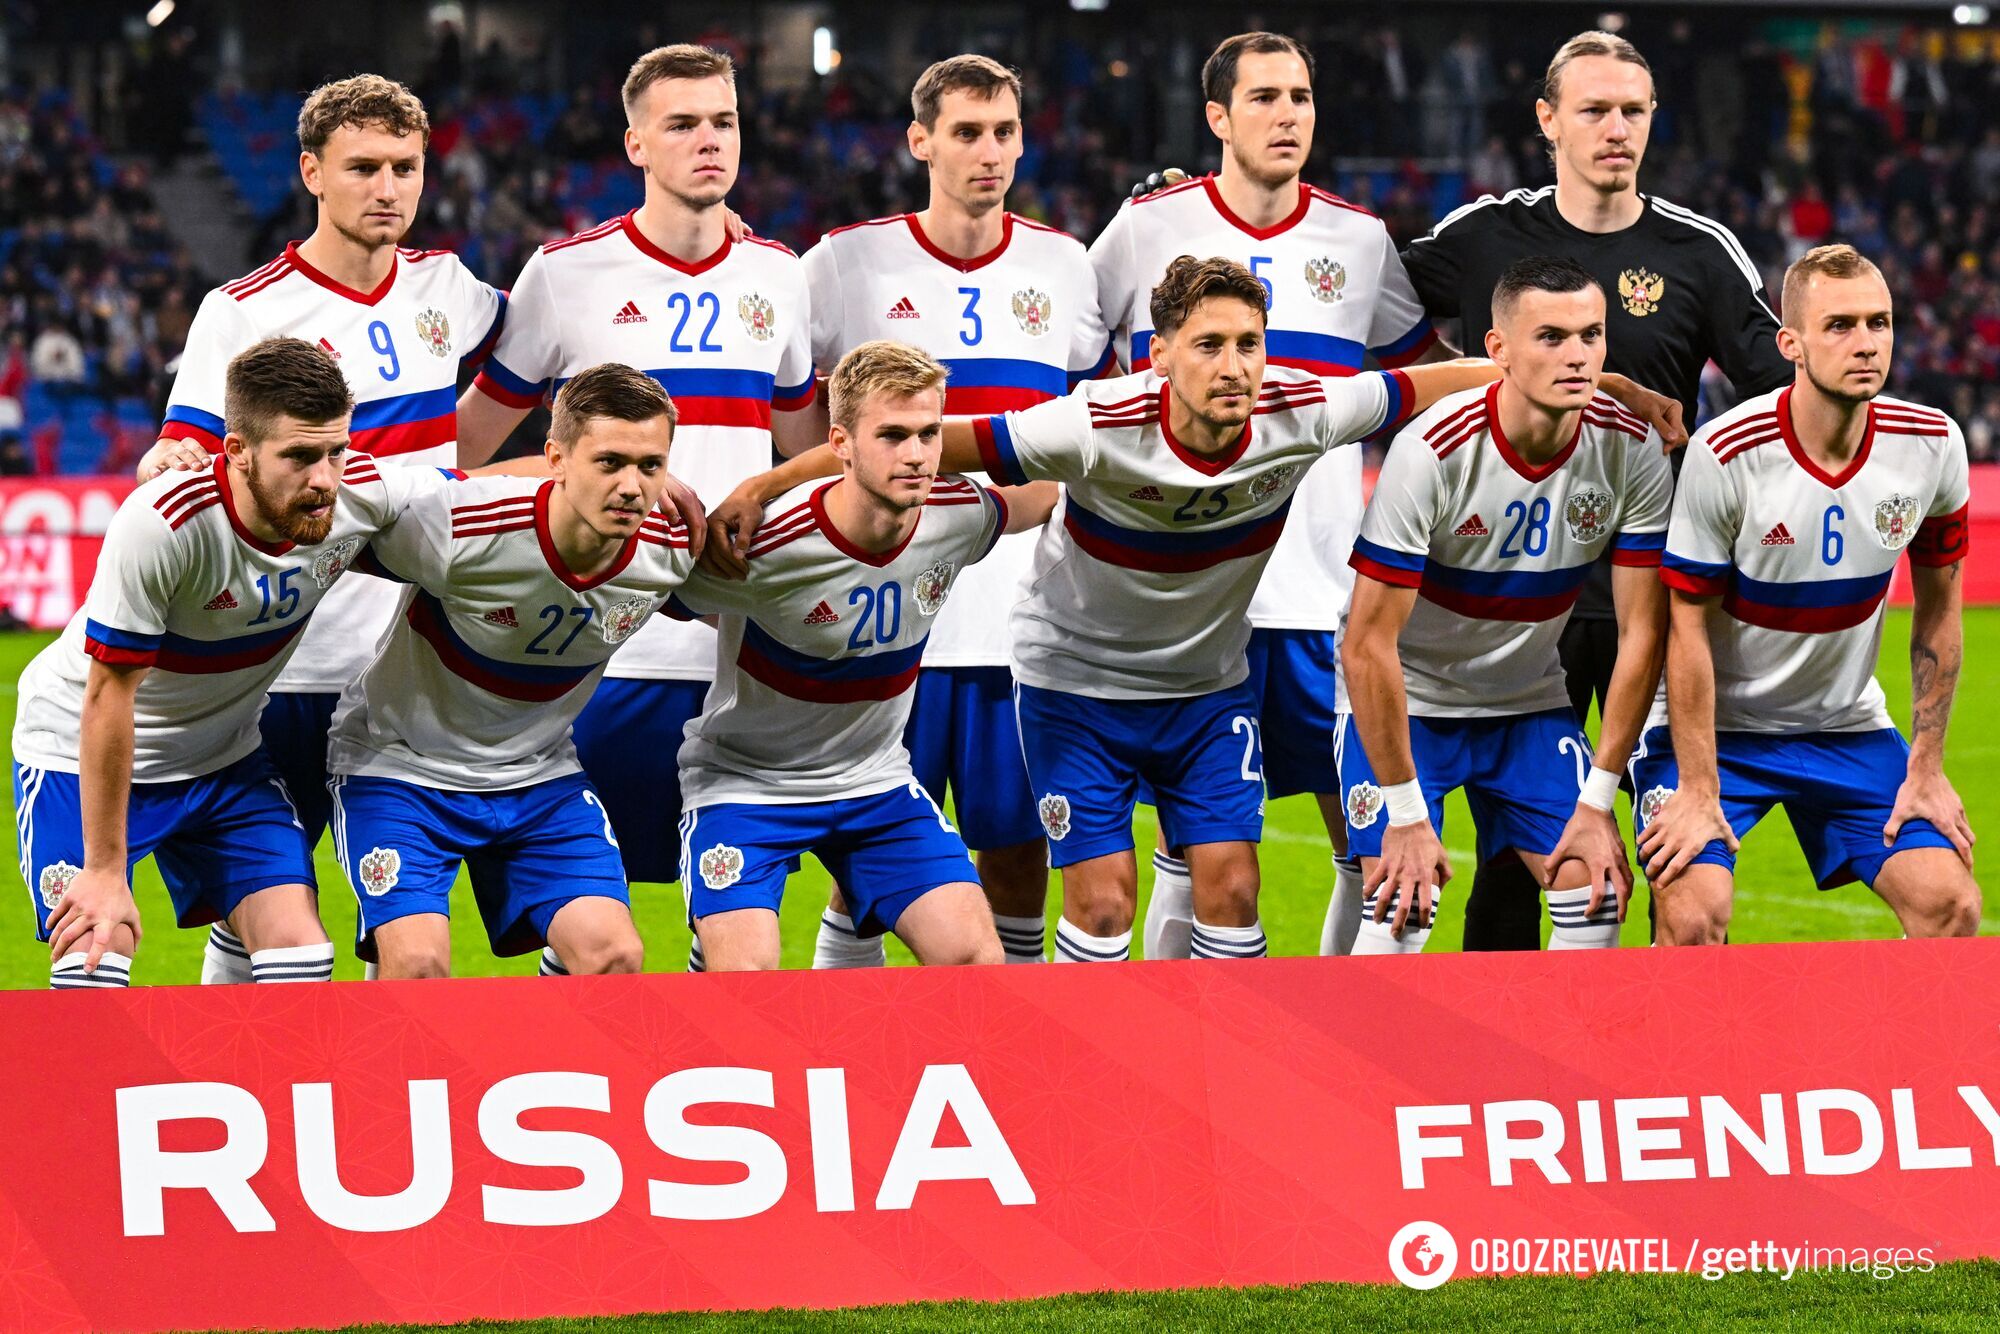 ''They are disgusted too'': another country refused to play with the Russian national soccer team